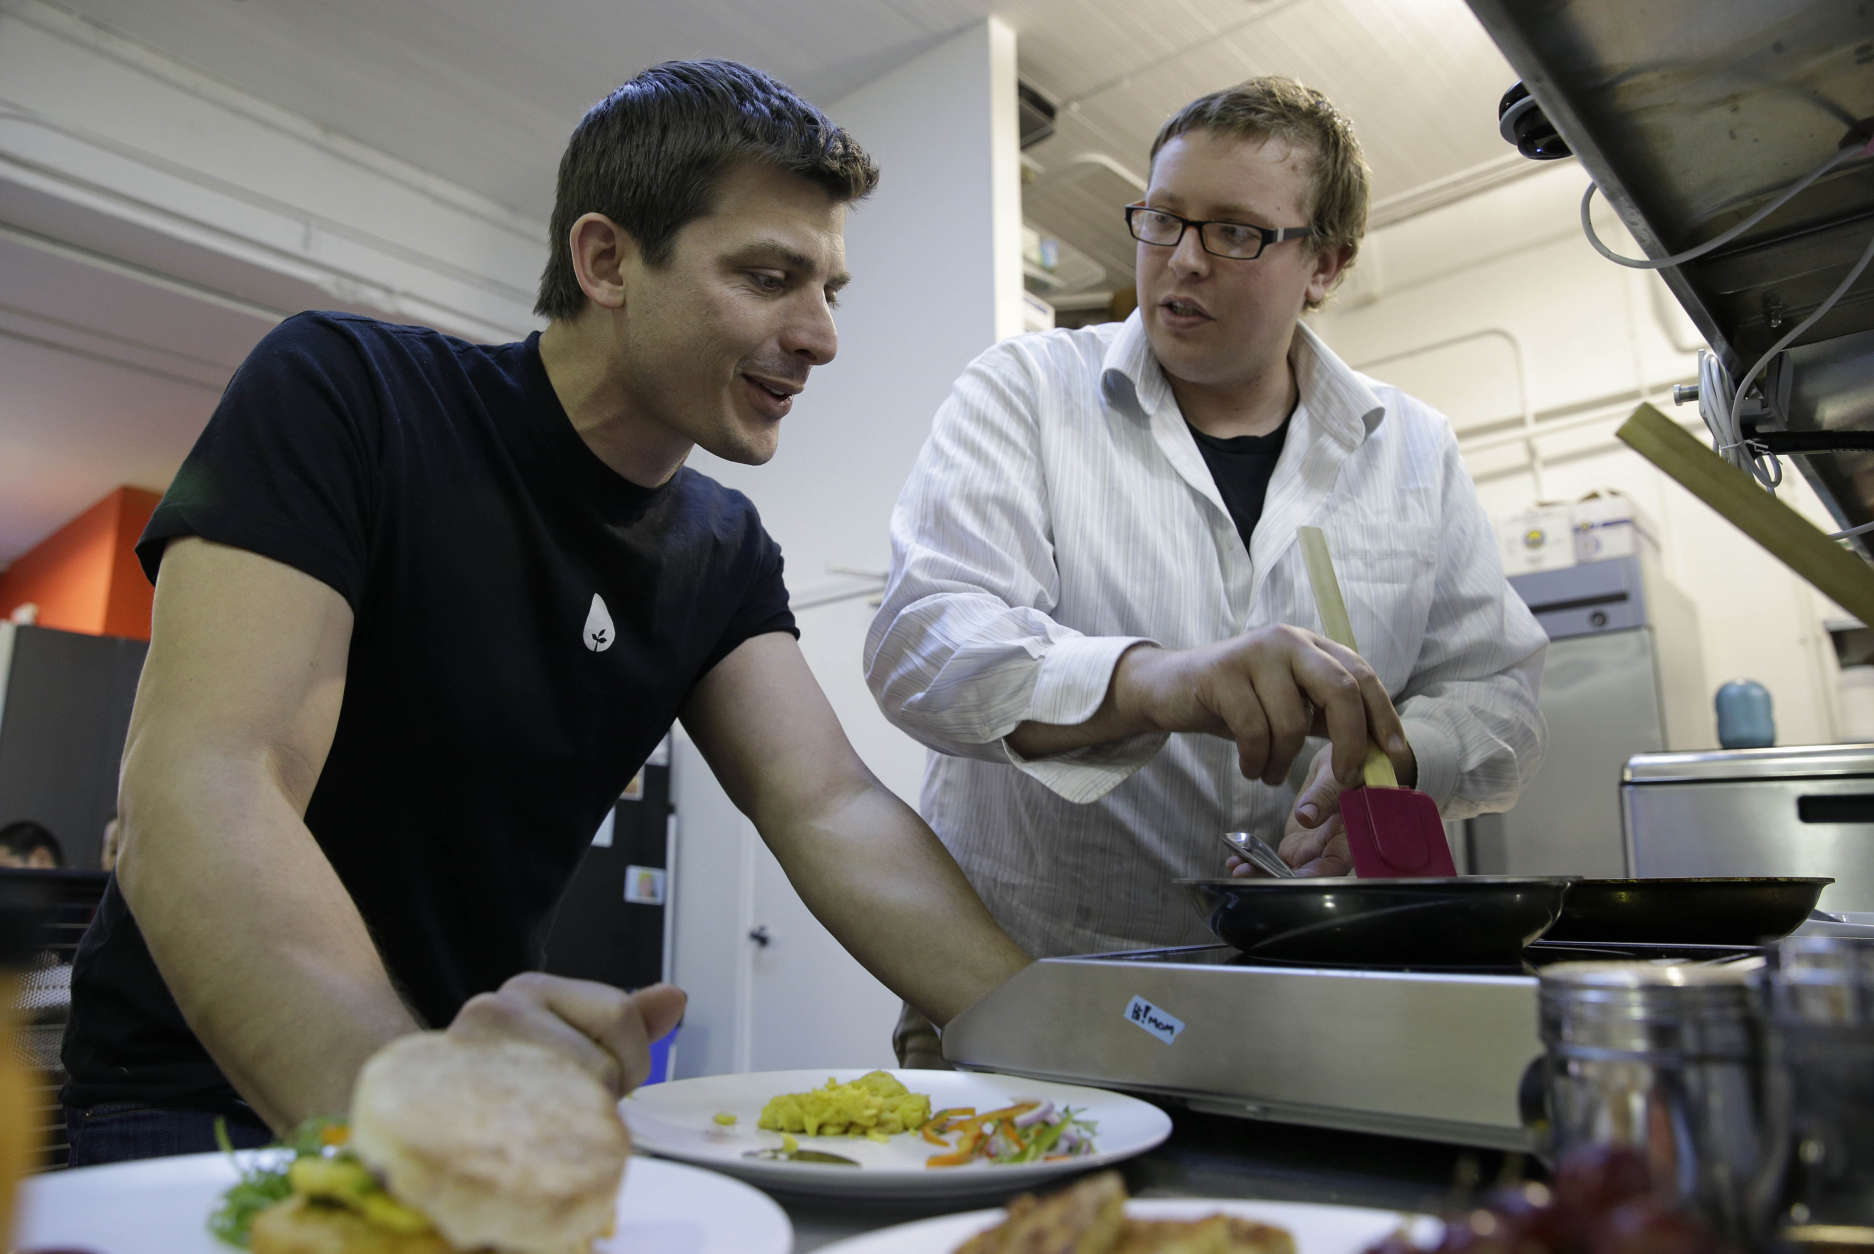 In this photo taken Tuesday, Dec. 3, 2013, CEO Josh Tetrick, left, watches as research and development chef Trevor Niekowal, right, makes a plant-based scrambled egg at Hampton Creek Foods in San Francisco.  Can plants replace eggs? A San Francisco startup backed by Bill Gates believes they can. Hampton Creek Foods is scouring the planet for plants that can replace chicken eggs in everything from cookies to omelets to French toast. Funded by prominent Silicon Valley investors, the upstart seeks to disrupt a global egg industry that backers say wastes energy, pollutes the environment, causes disease outbreaks and confines chickens to tiny spaces. (AP Photo/Eric Risberg)